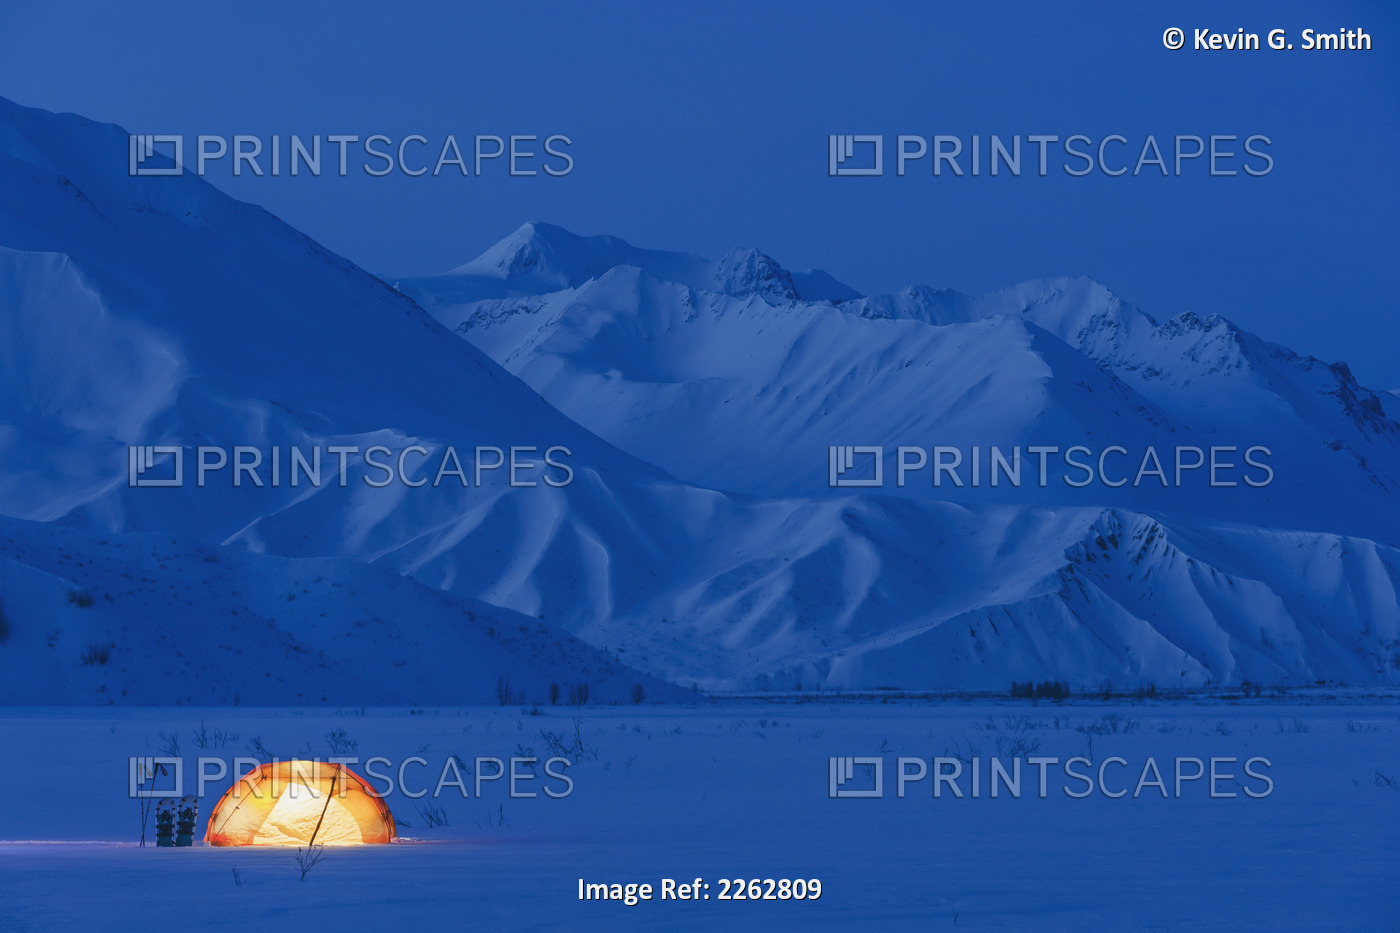 A Backpacking Tent Lit Up At Twilight Alaska Range In The Distance In Winter ...